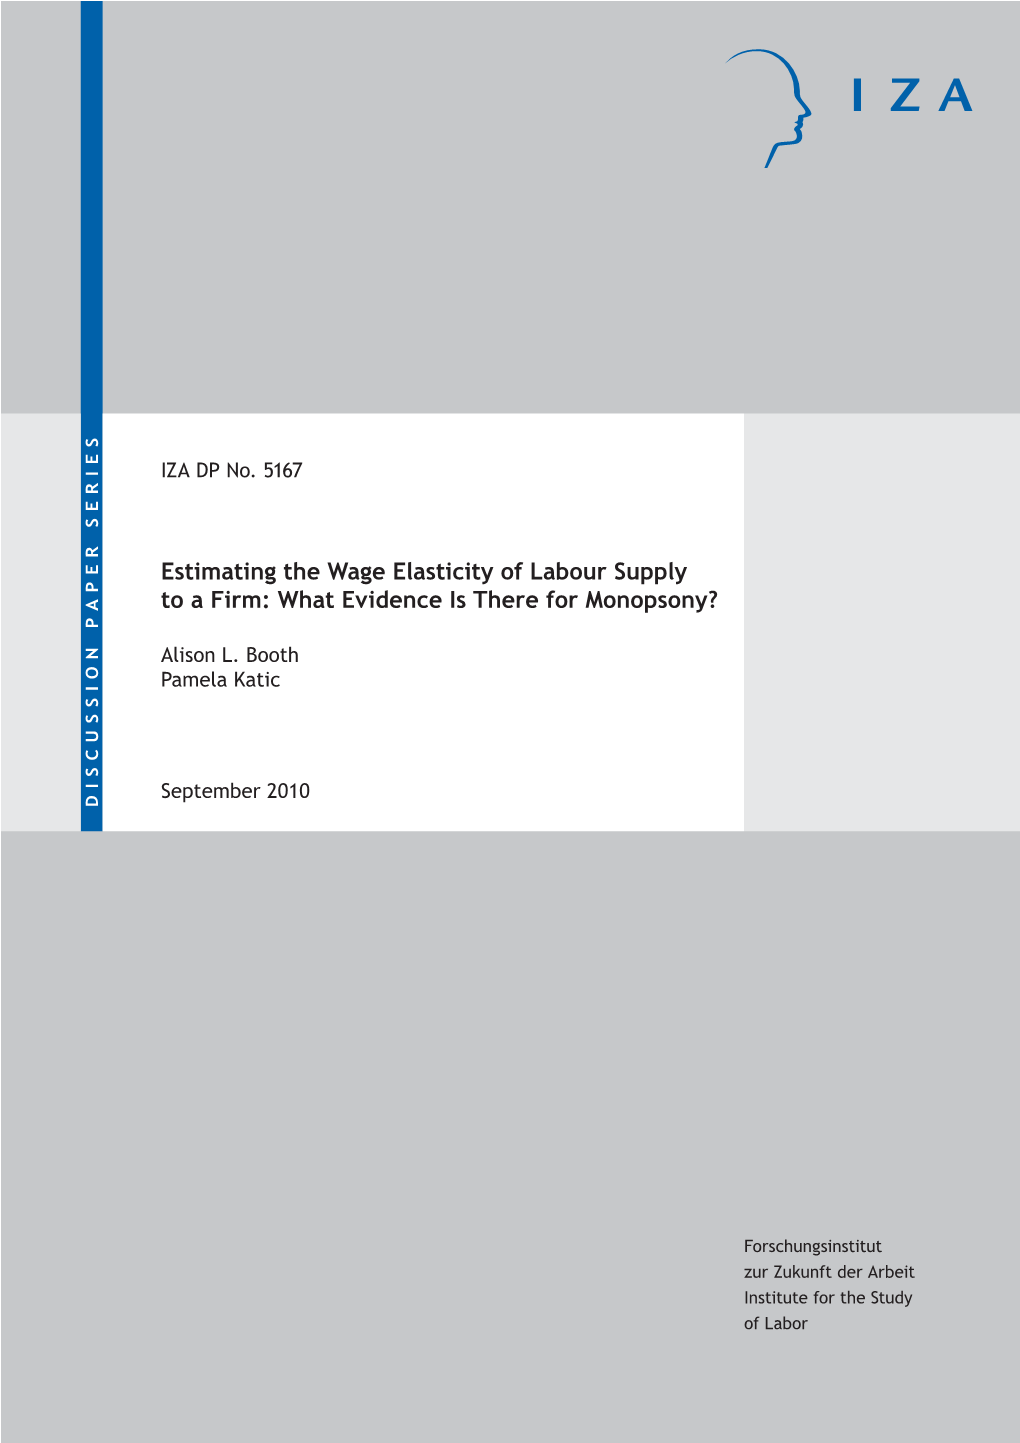 Estimating the Wage Elasticity of Labour Supply to a Firm: What Evidence Is There for Monopsony?